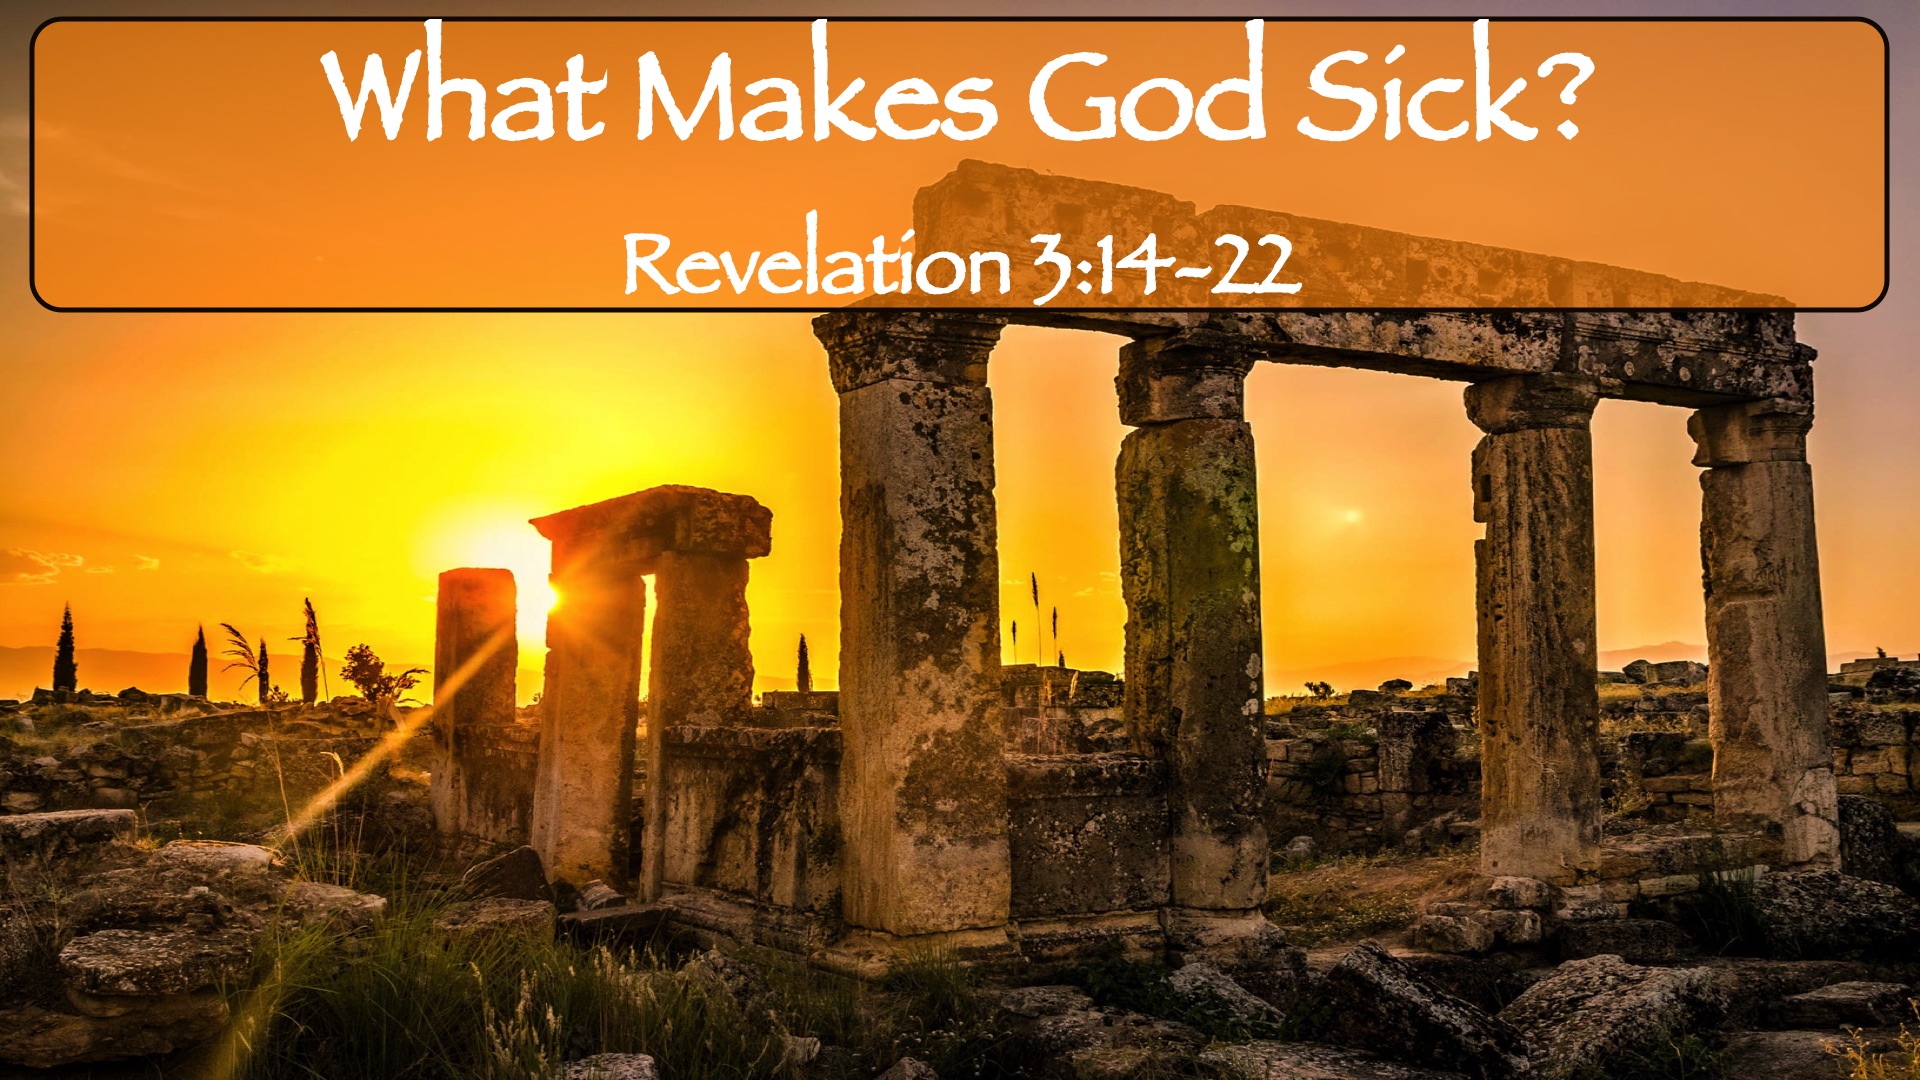 The Book of Revelation: What Makes God Sick?